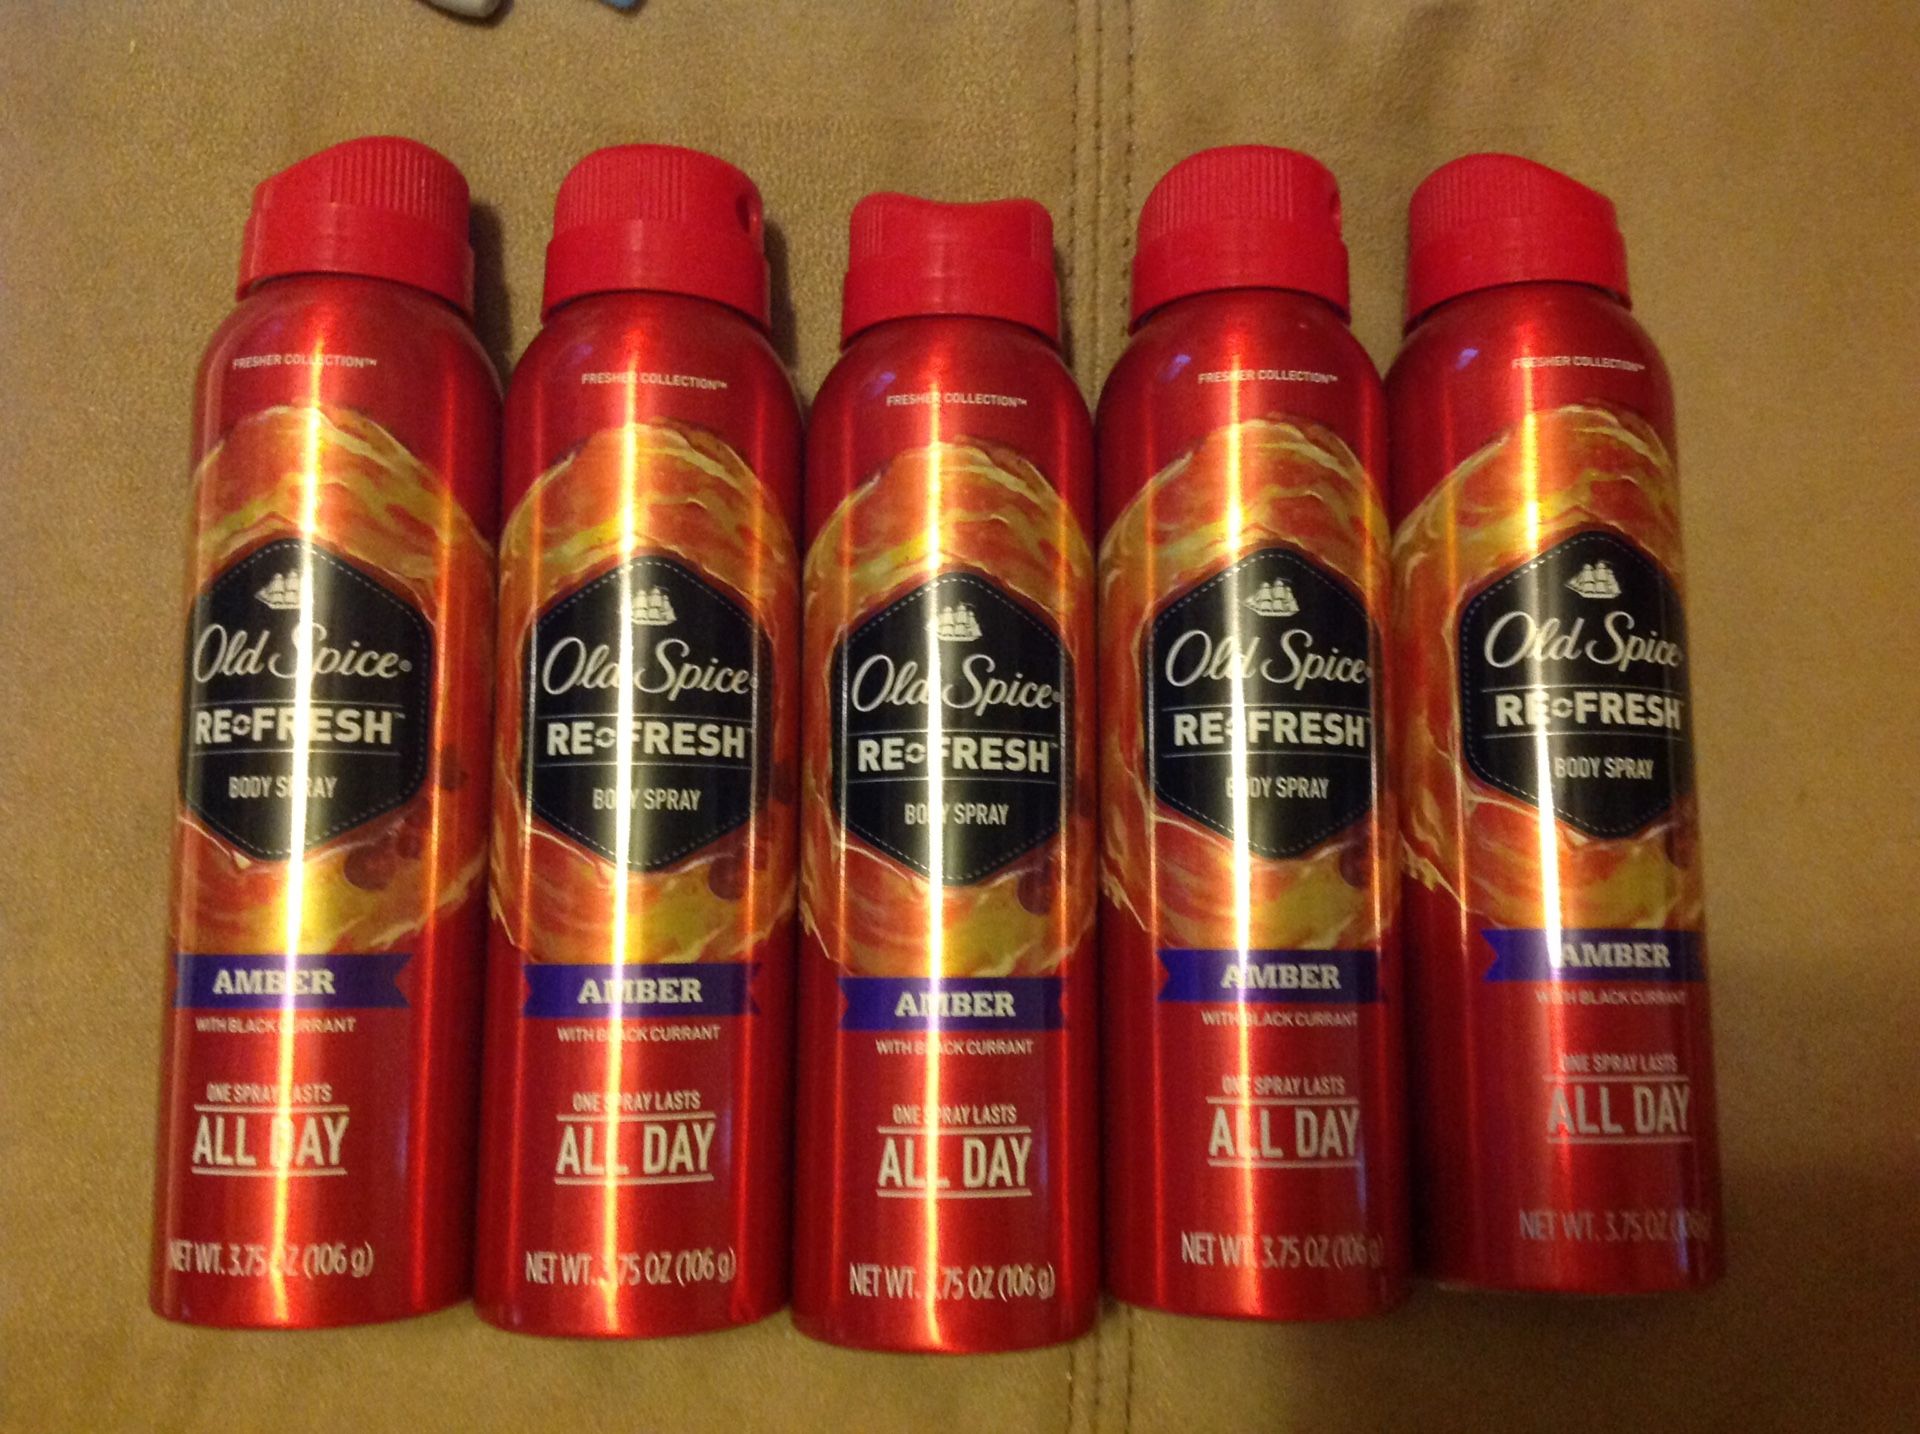 5 brand new full size old spice body sprays amber scent never used